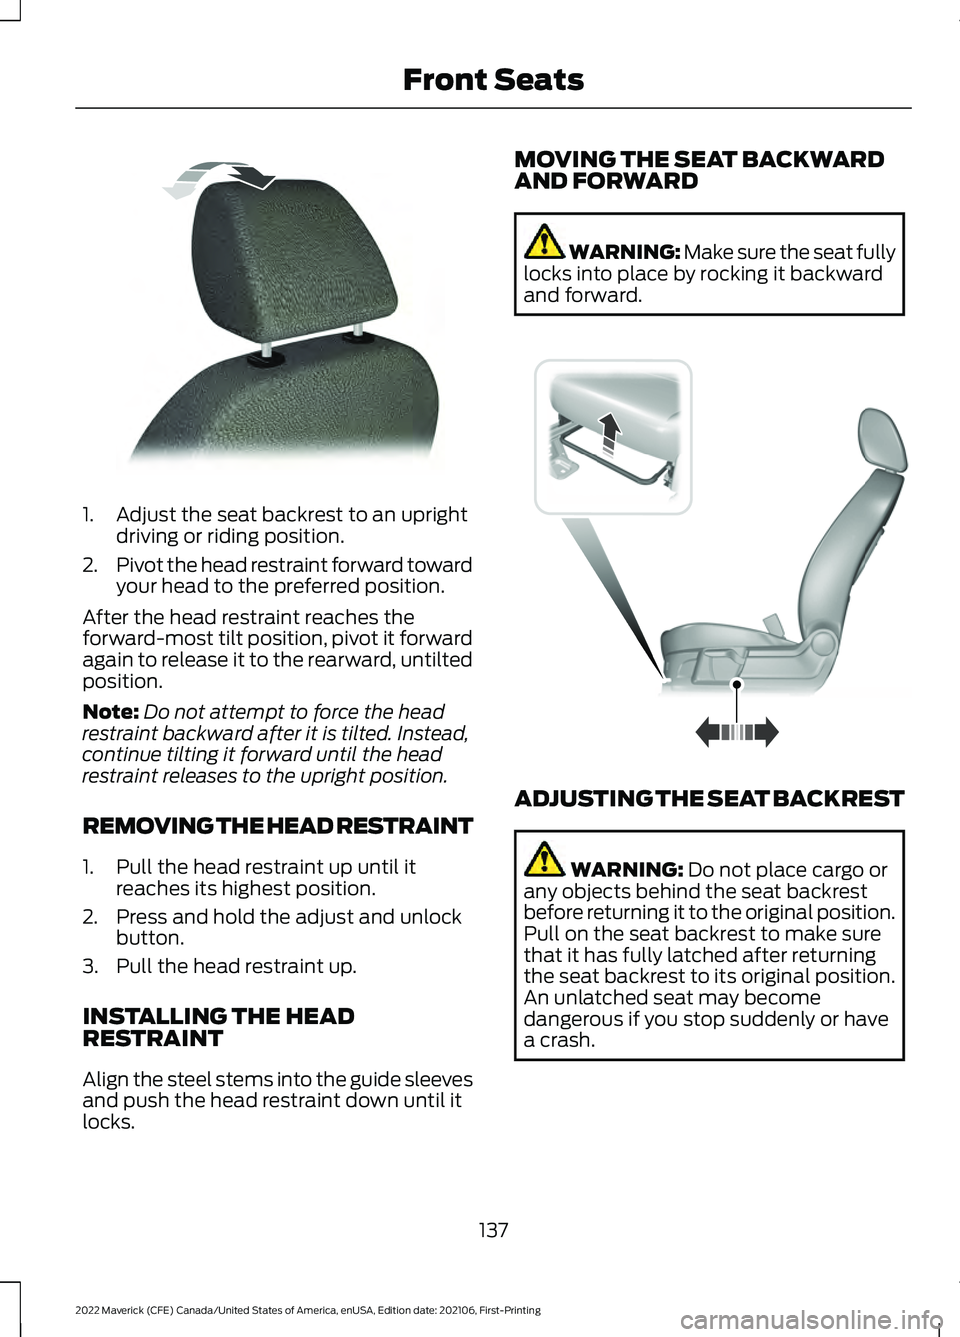 FORD MAVERICK 2022 User Guide 1. Adjust the seat backrest to an upright
driving or riding position.
2. Pivot the head restraint forward toward
your head to the preferred position.
After the head restraint reaches the
forward-most 